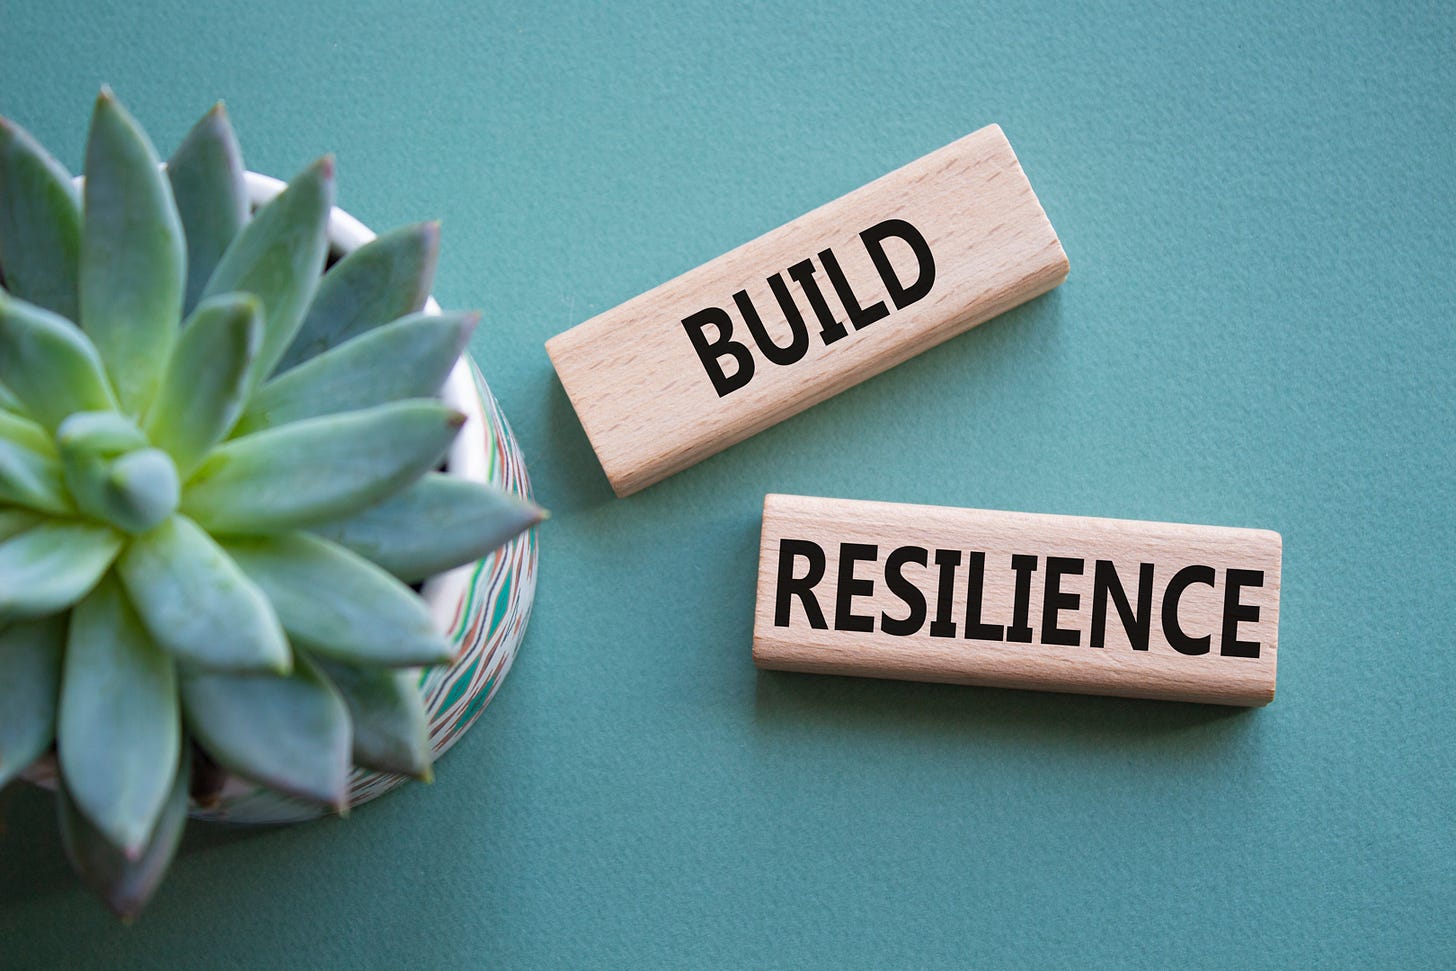 How to be a resilient writer. Image shows wooden blocks with the words 'build' and 'resilience' next to a succulent plant, on a grey/green background.